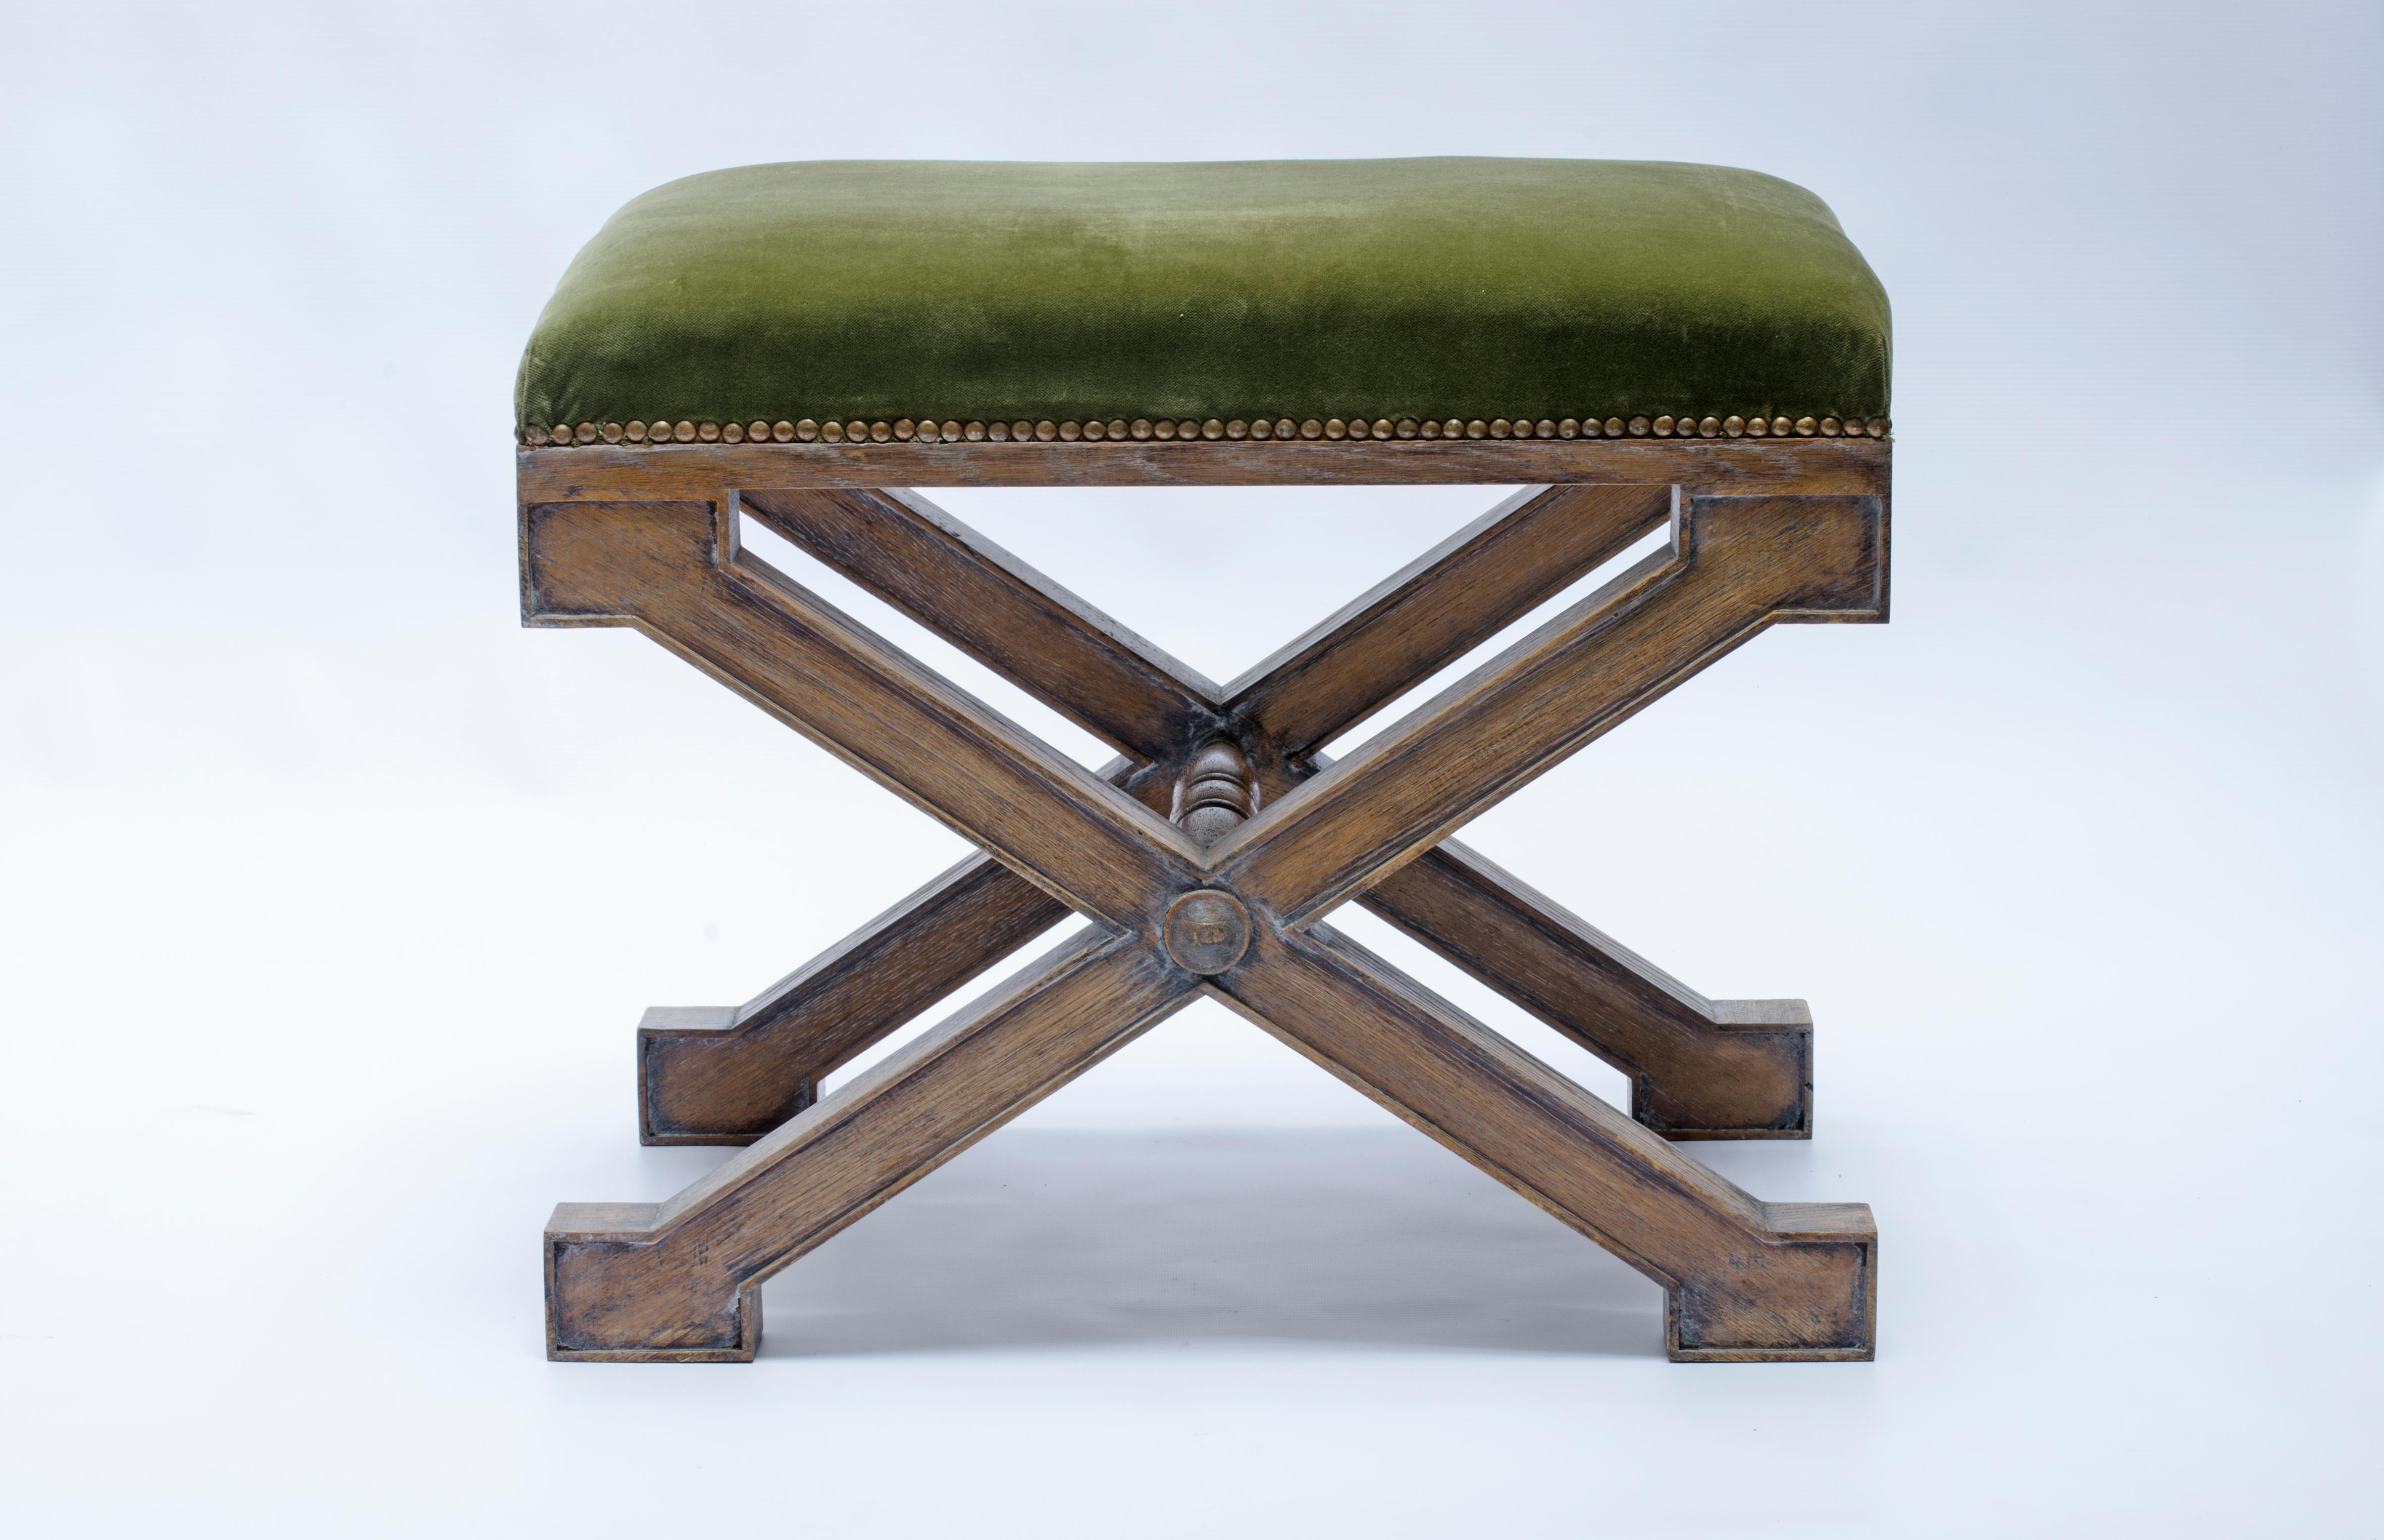 Pair of benches in pickled oak wood and upholstered in corduroy. Design by José Emilio Terry (1890-1969).

France, Circa 1940.